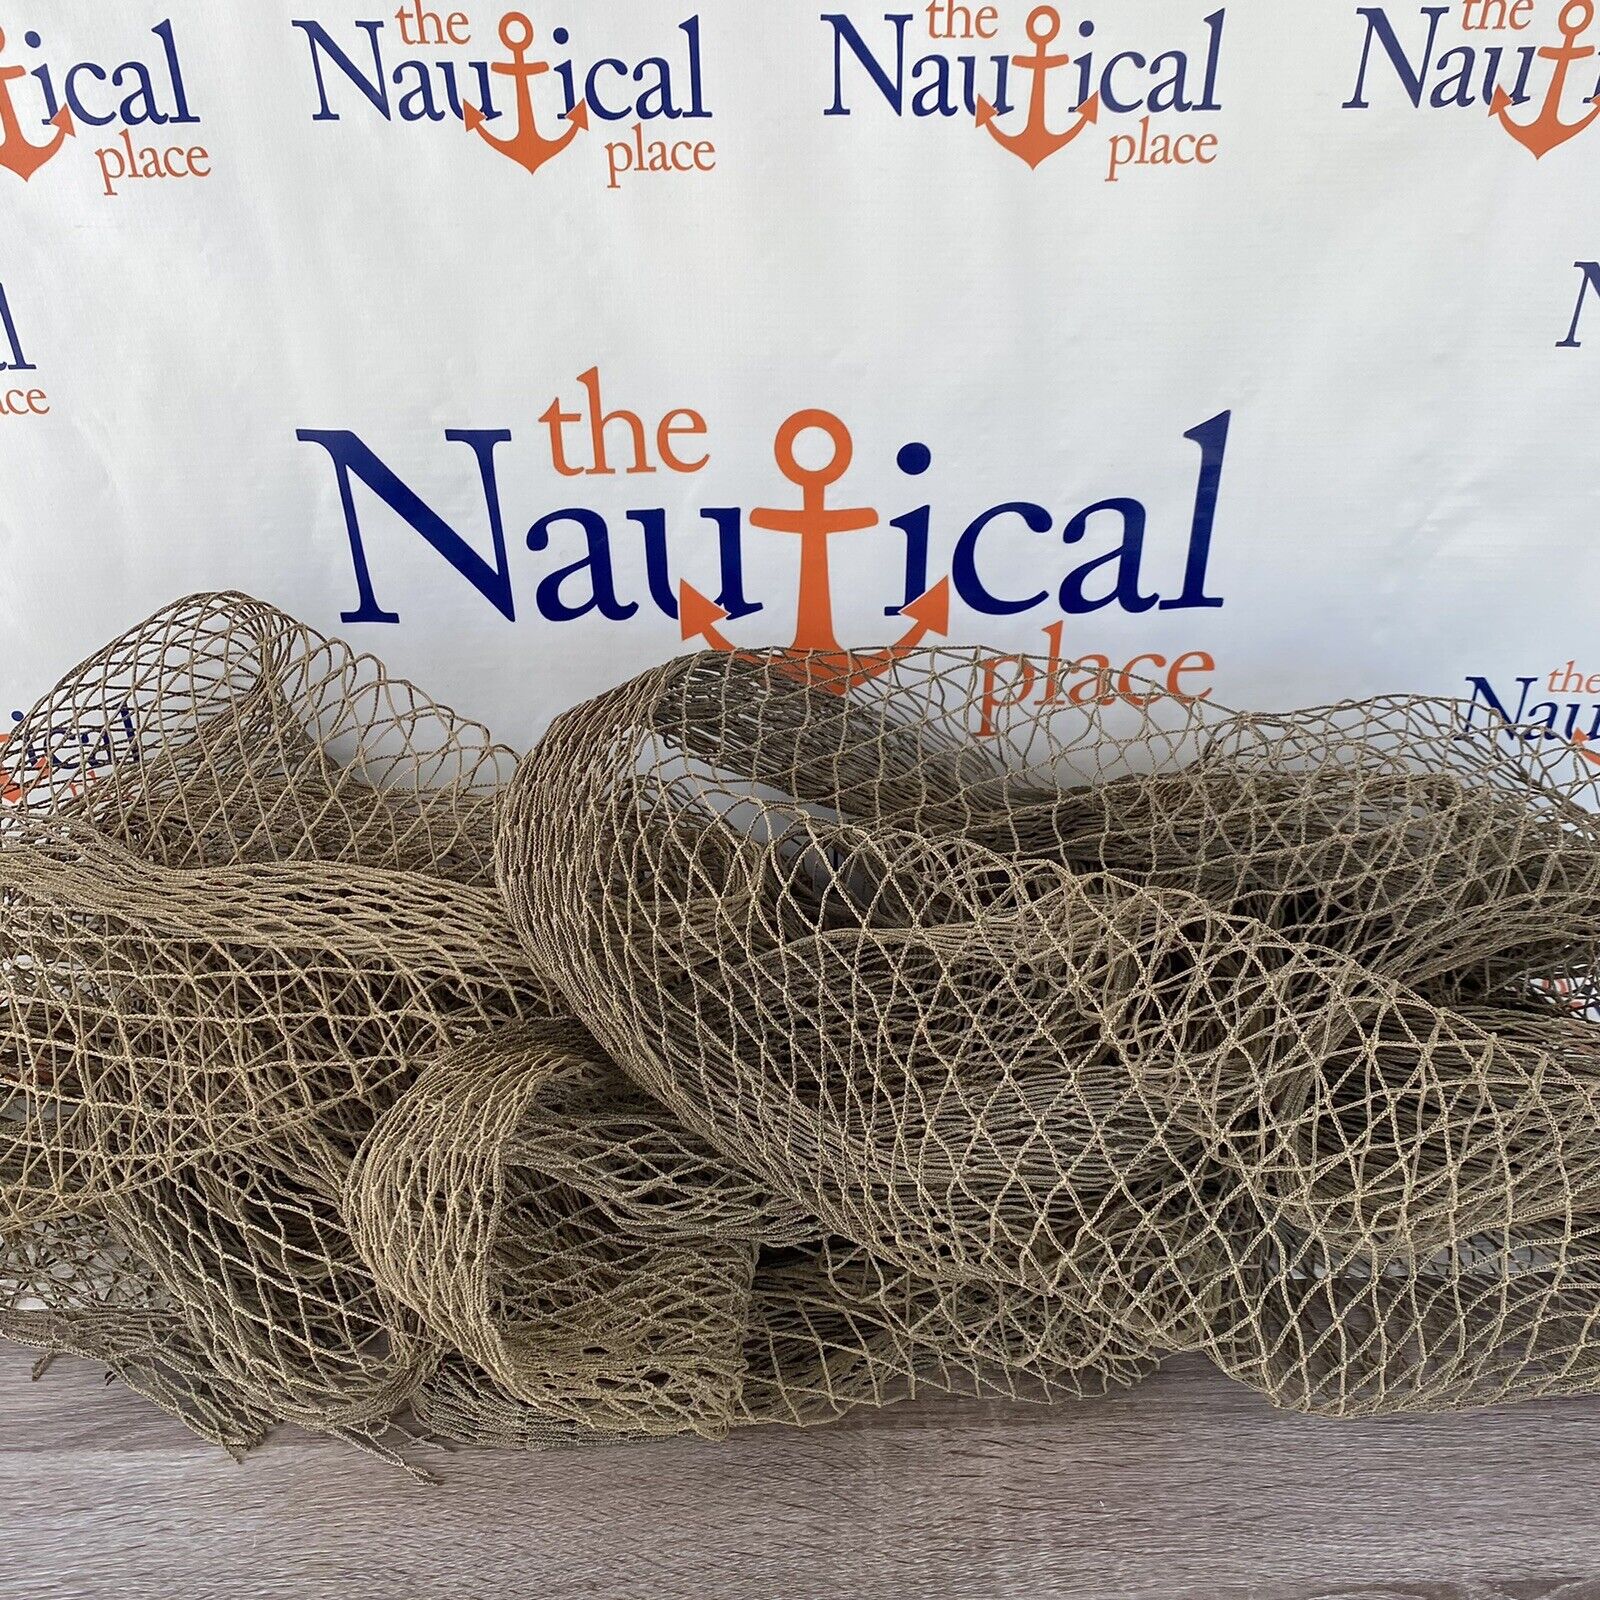 Large Authentic Fishing Net Cut From Real Commercial Fish Netting - 5ft x 100ft